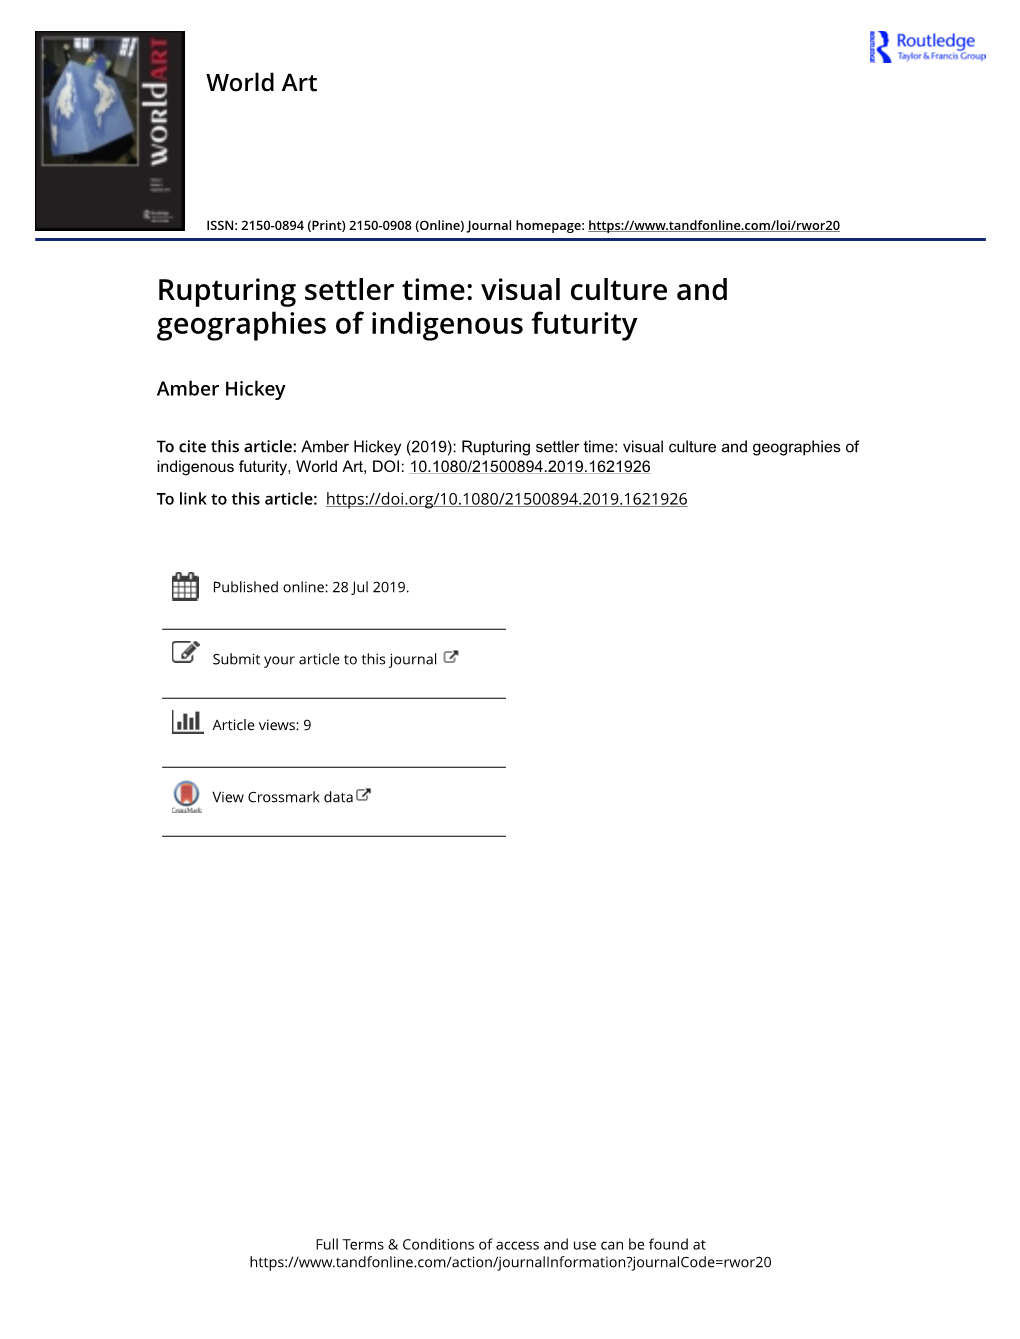 Rupturing Settler Time: Visual Culture and Geographies of Indigenous Futurity